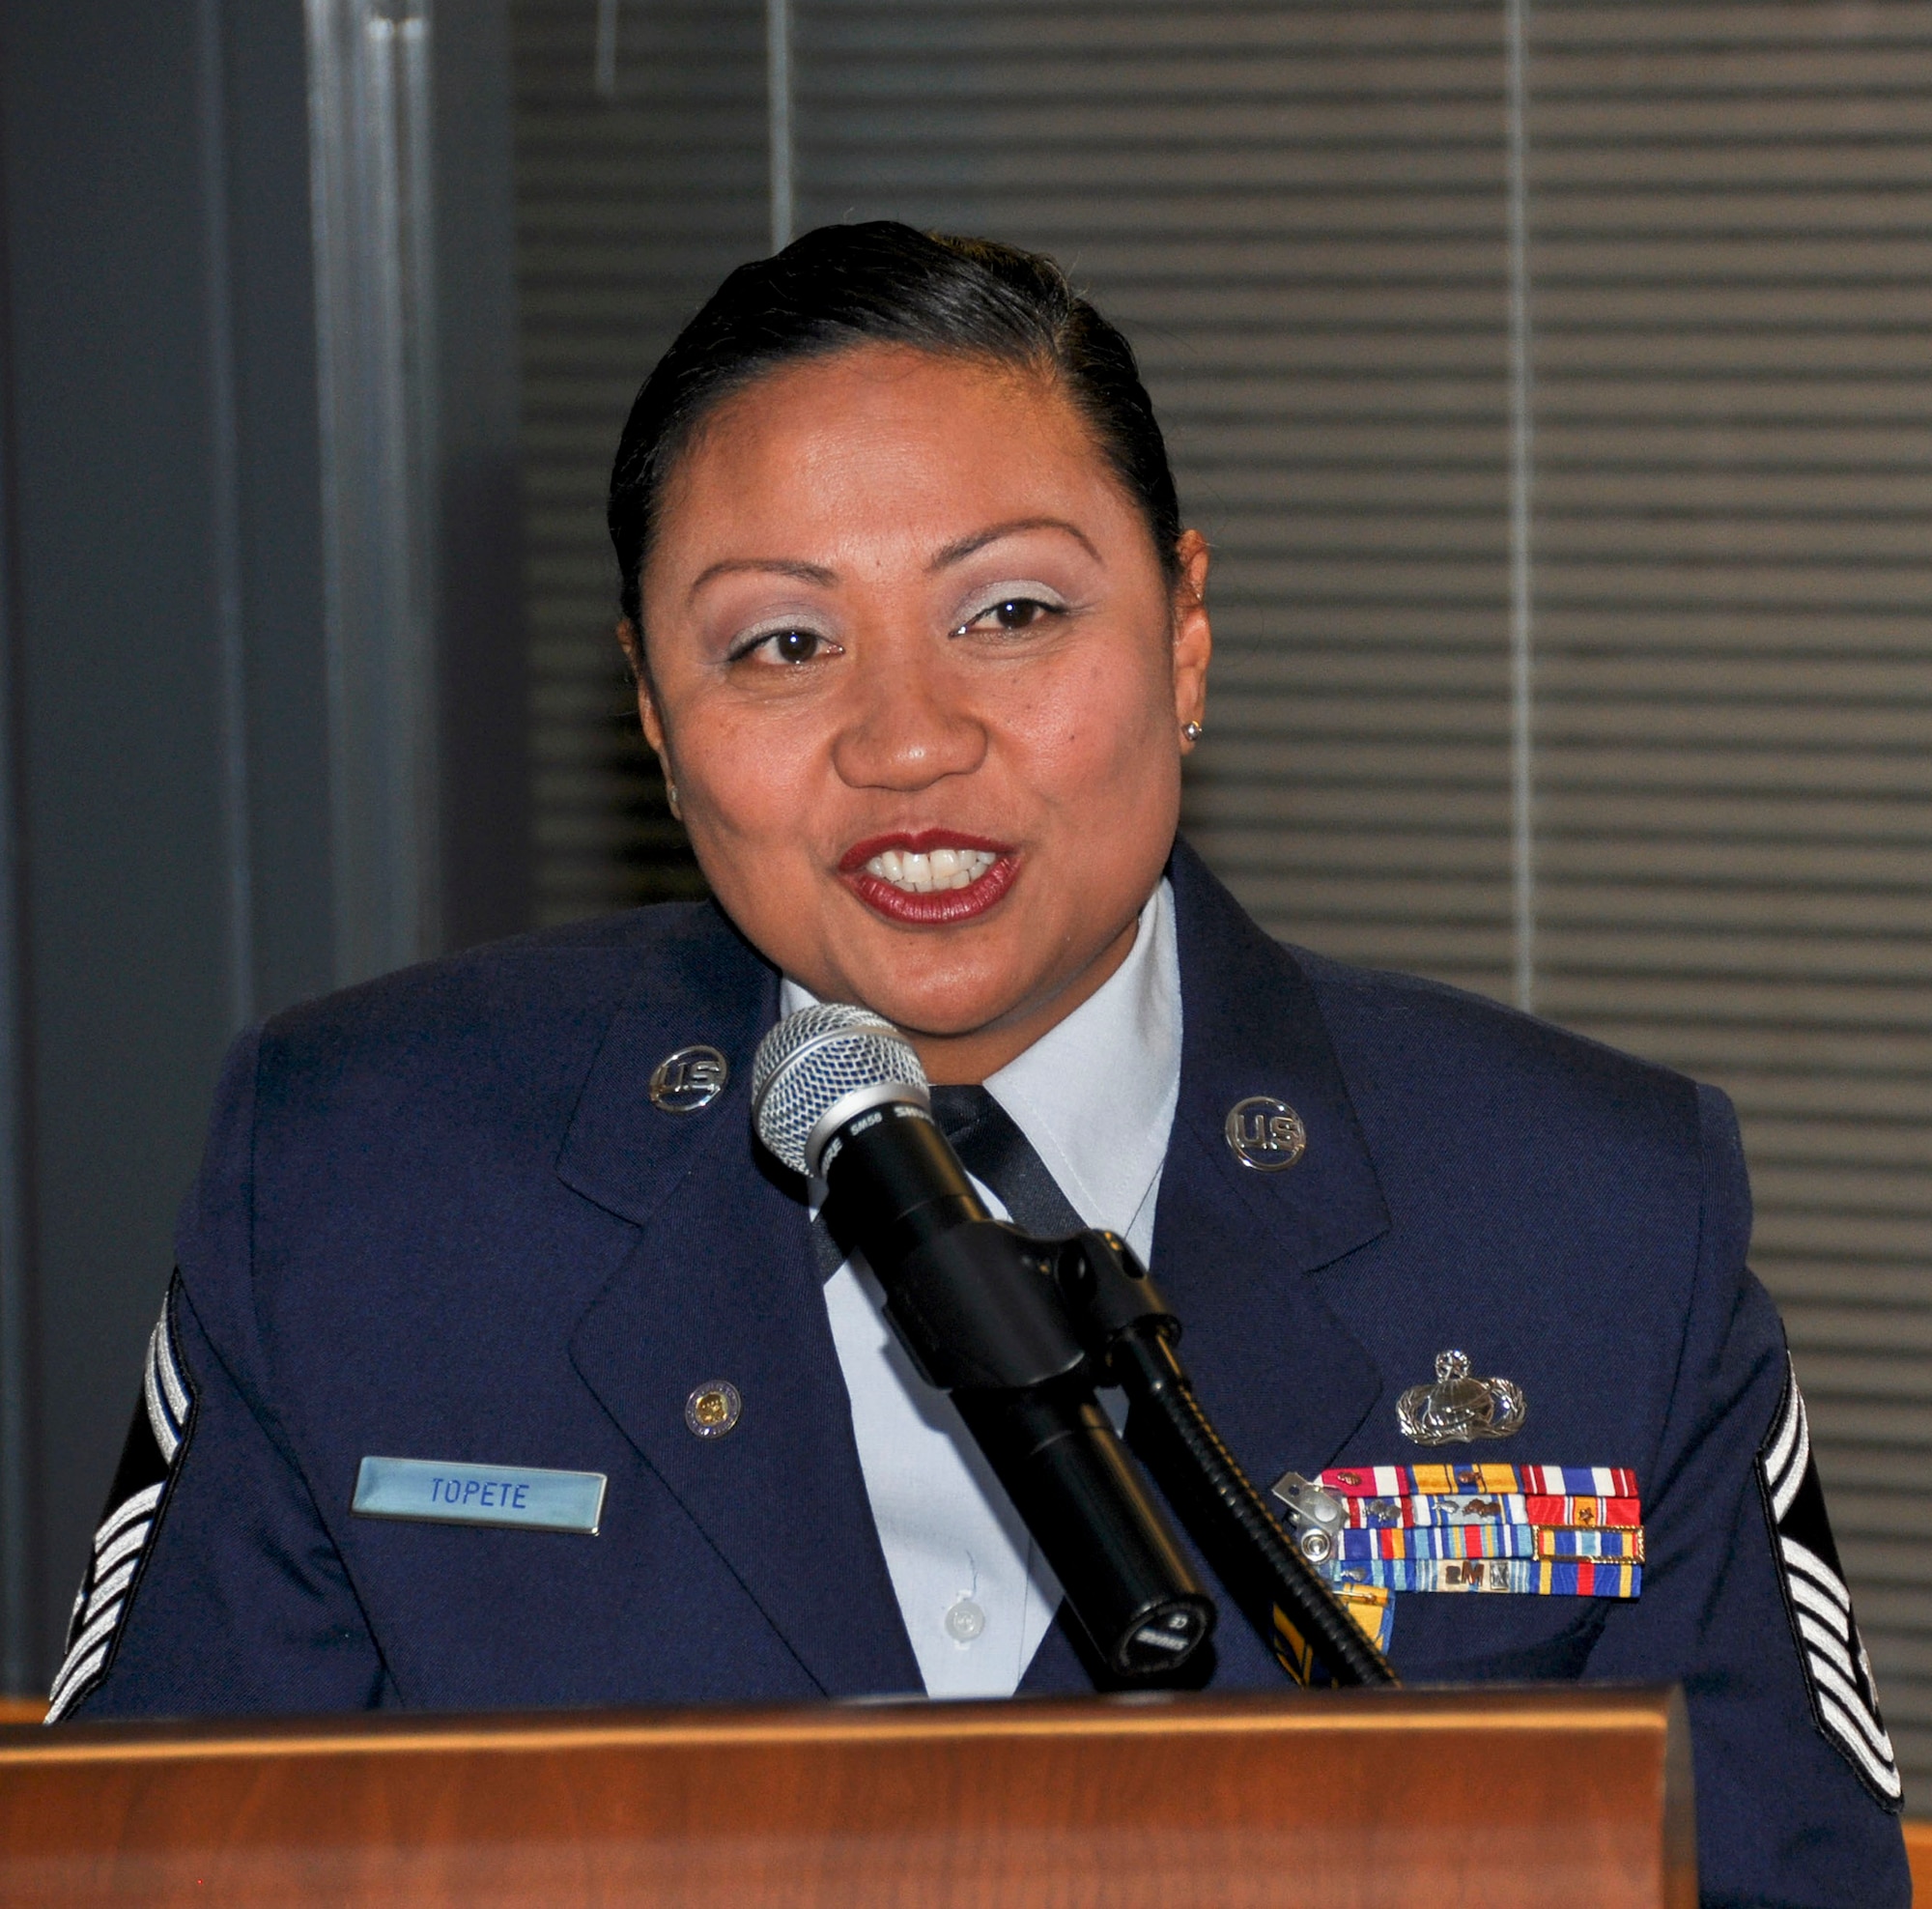 TRAVIS AIR FORCE BASE, Calif. -- Senior Master Sgt. Dahlia Topete, on the occasion of her retirement from the U.S. Air Force Reserve Nov. 16, 2013, at Travis Air Force Base, Calif. (U.S. Air Force photo by Tech. Sgt. Rachel Martinez/Released)